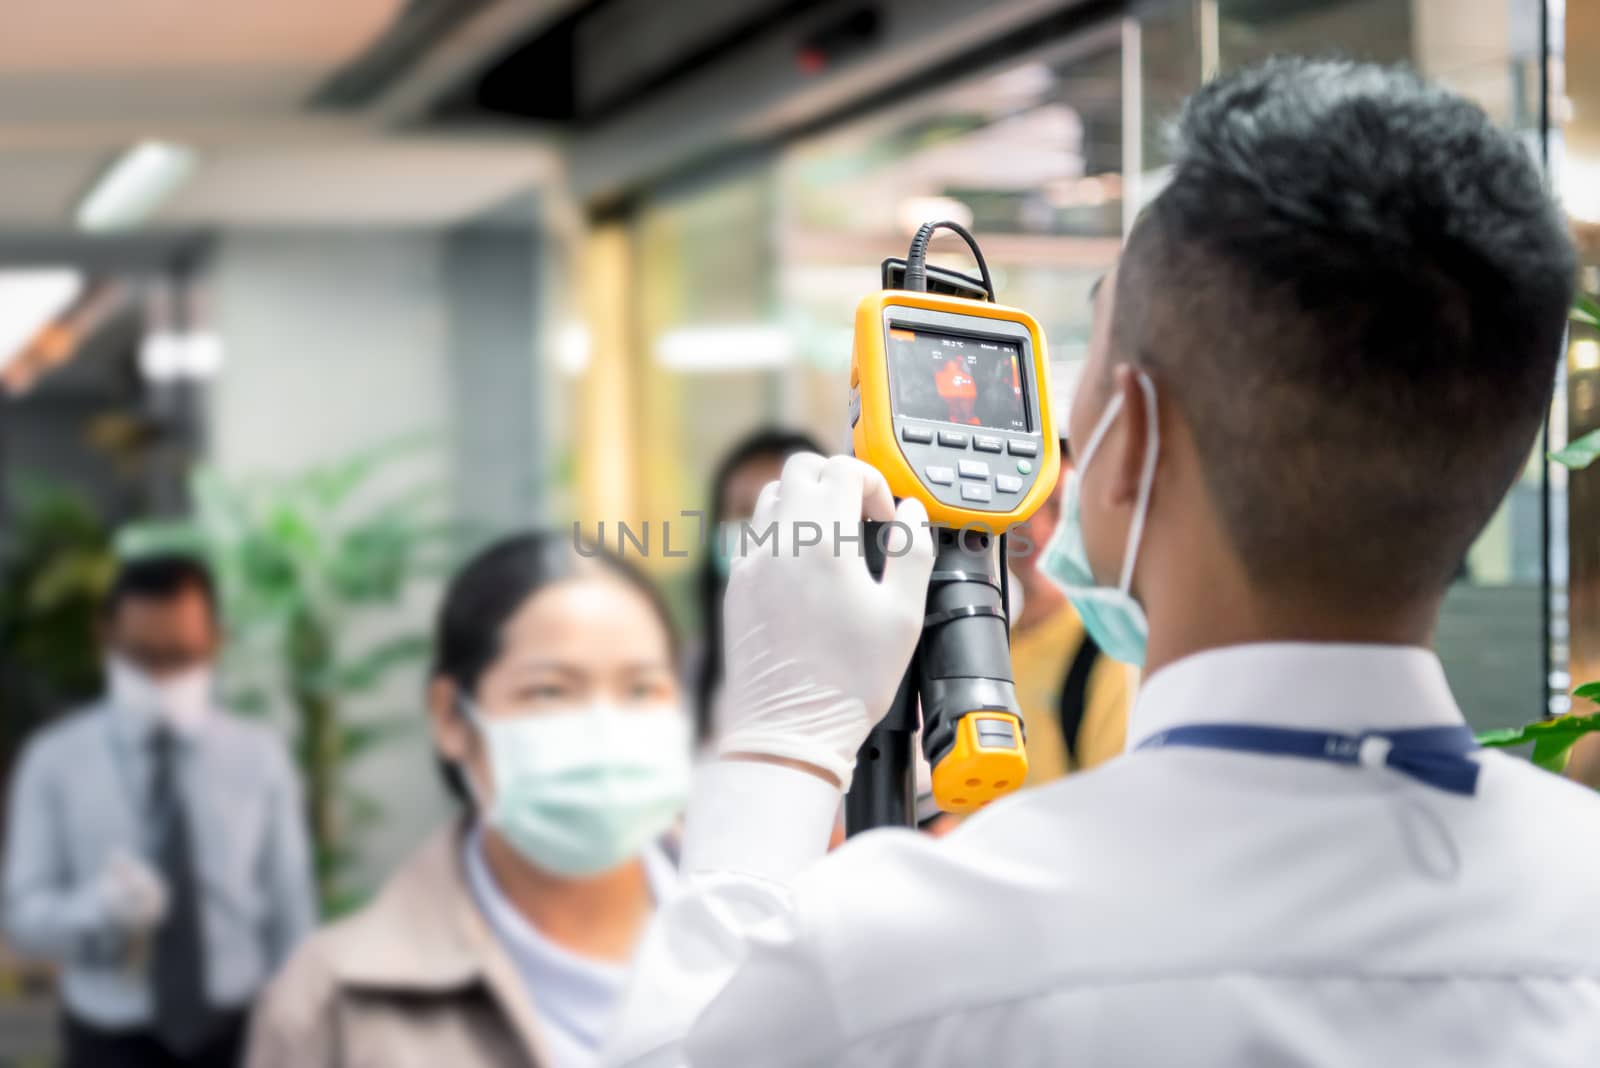 Asian people waiting for body temperature check before access to building for against epidemic flu covid19 or corona virus from wuhan in office by thermoscan or infrared thermal camera